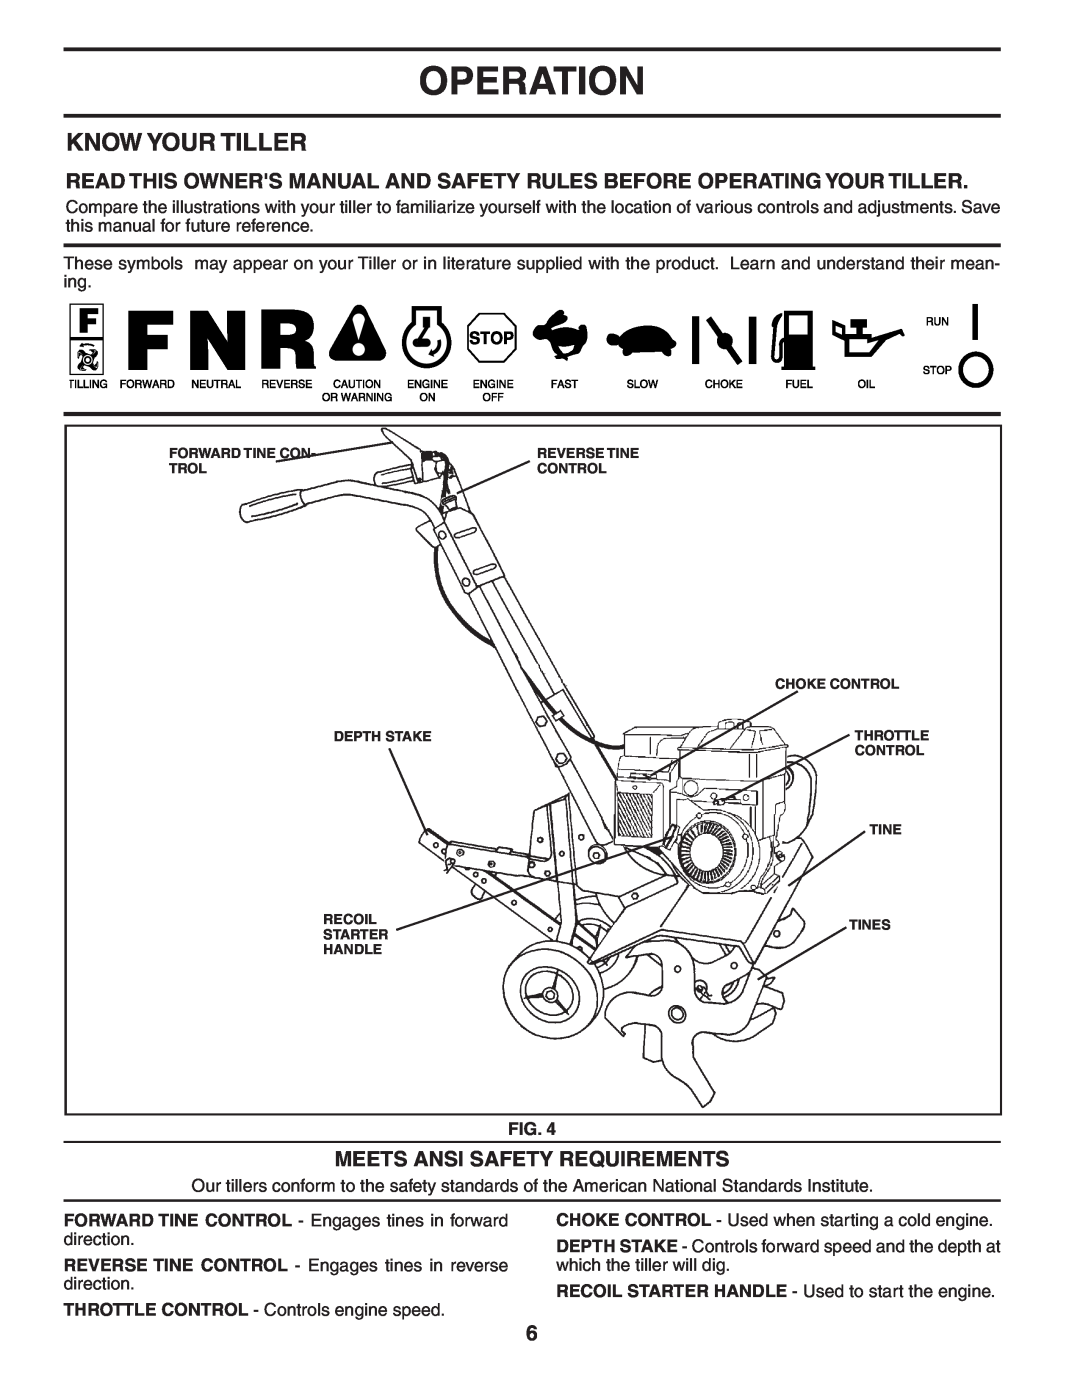 Poulan HDF550L owner manual Operation, Know Your Tiller, Meets Ansi Safety Requirements 